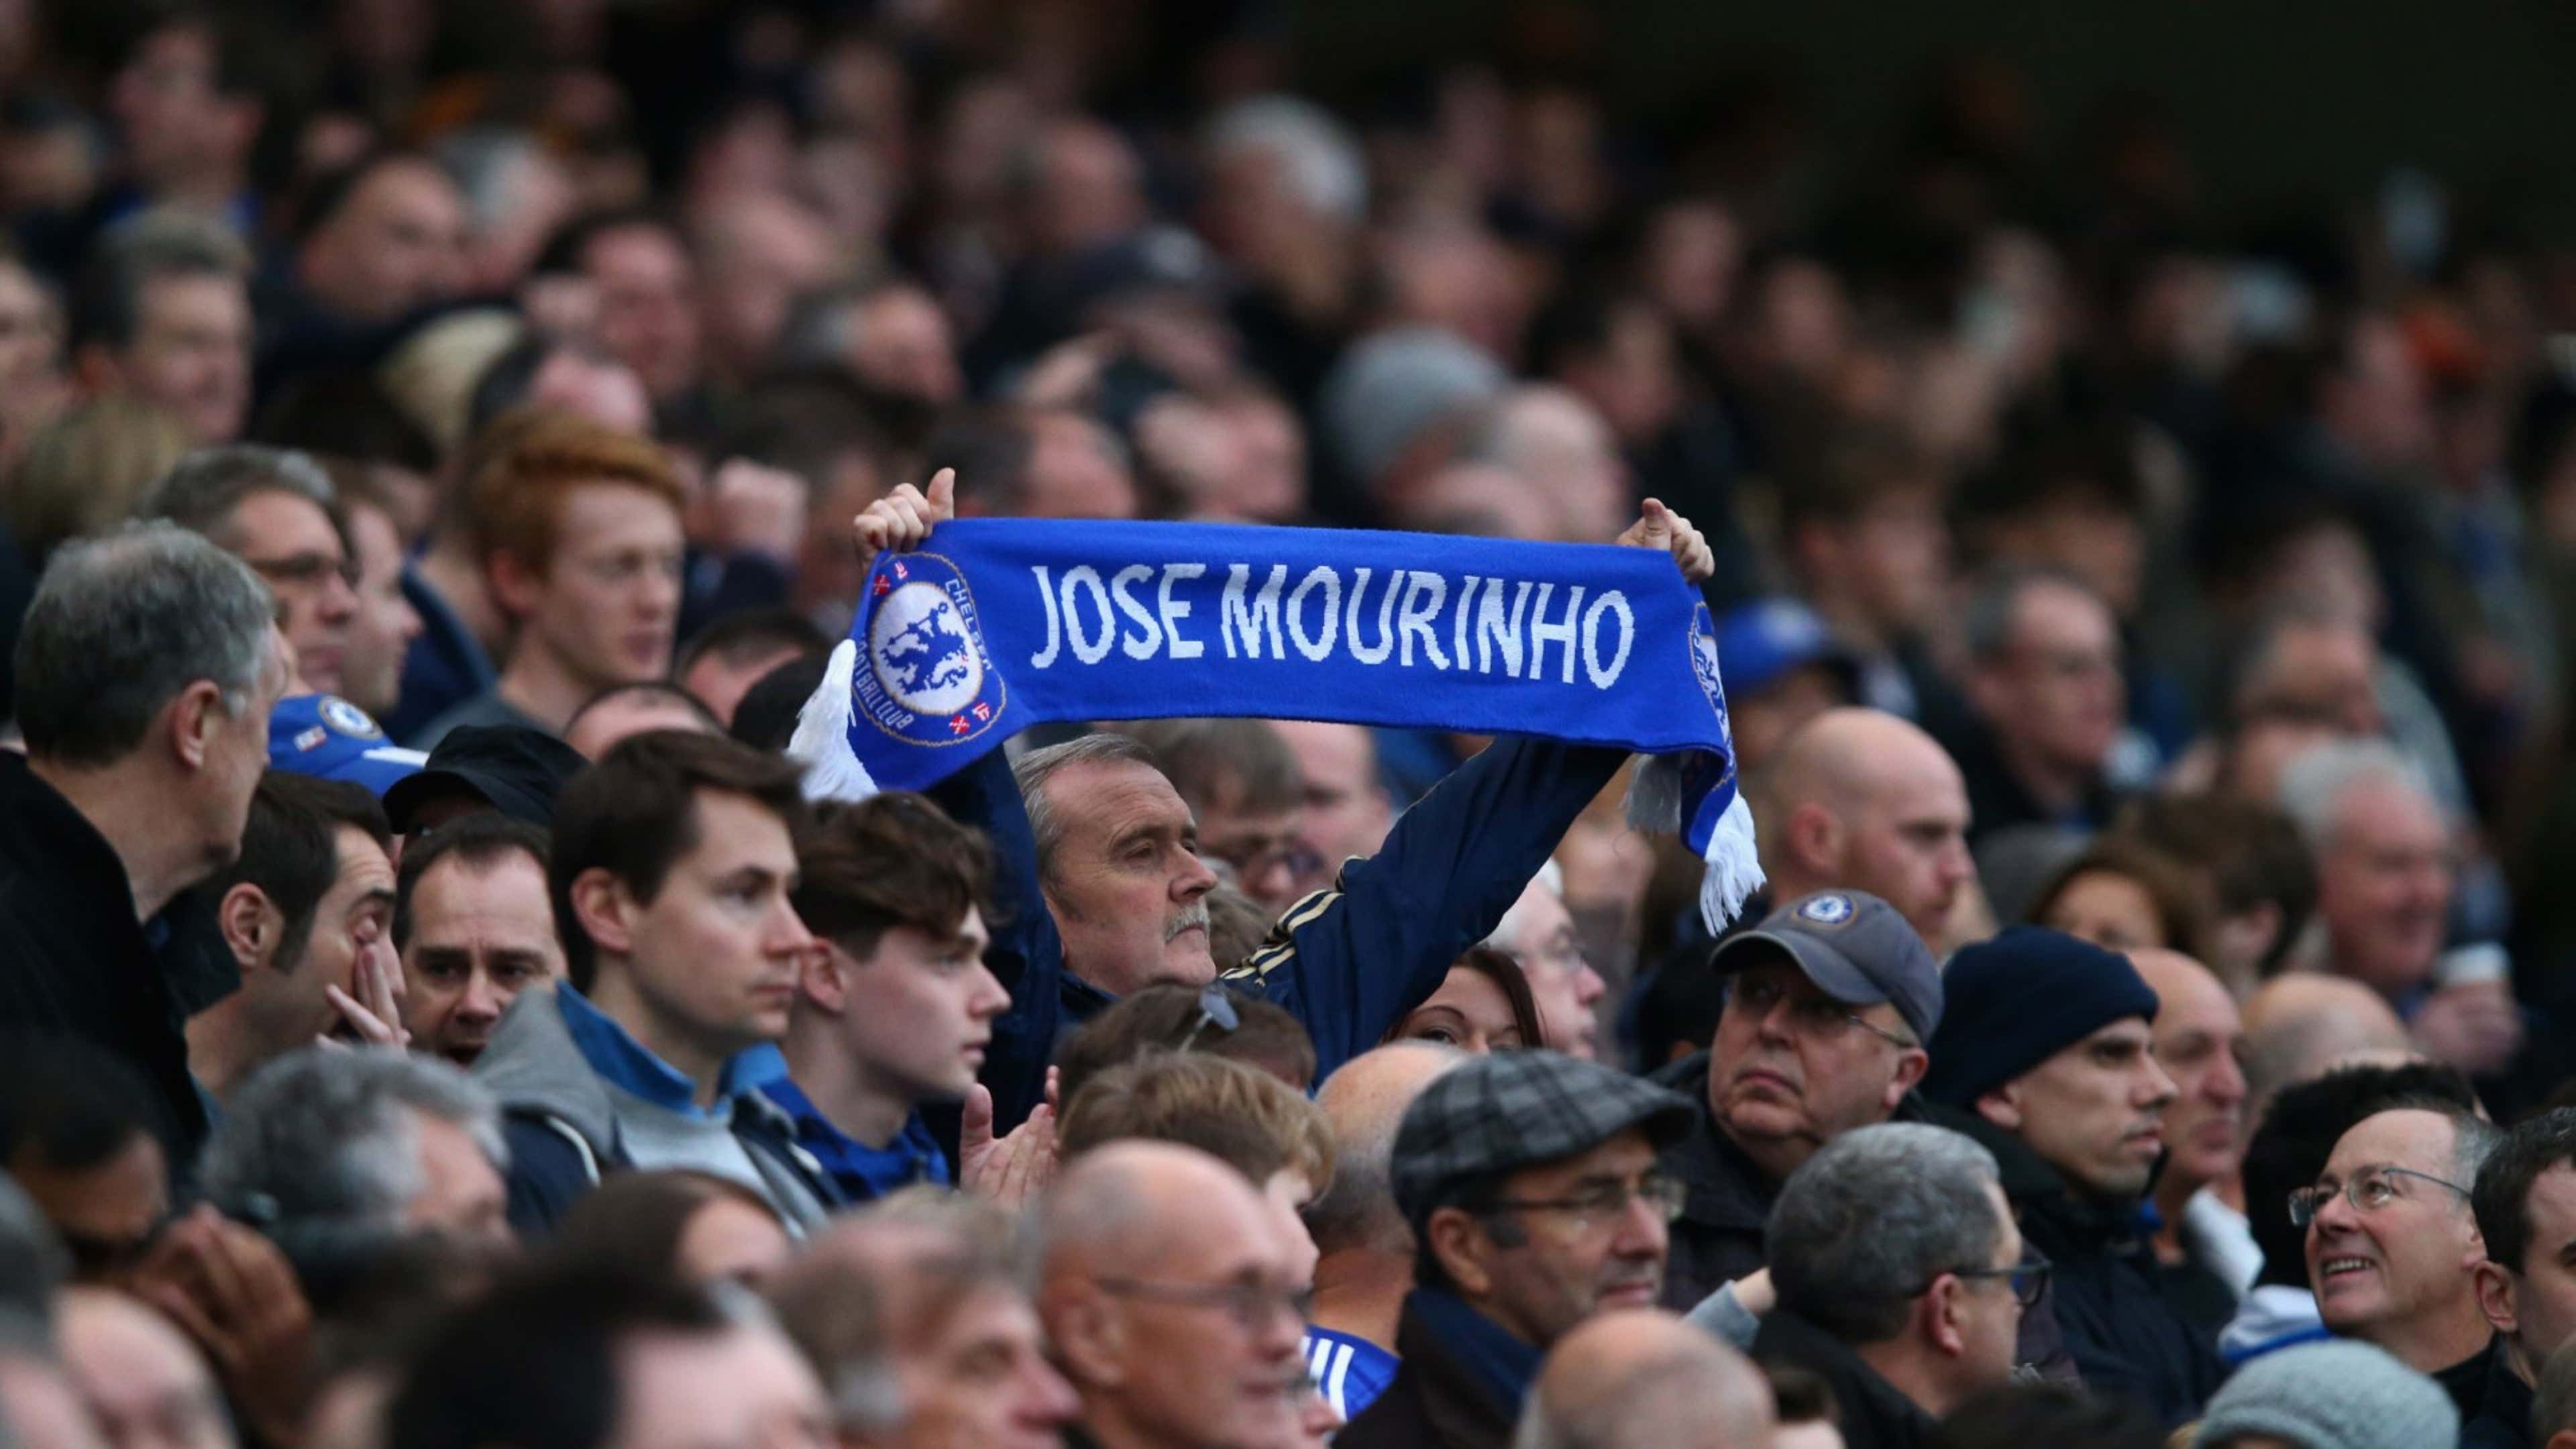 Be careful what you wish for, Chelsea fans: Jose Mourinho's return would only lead to more carnage | Goal.com